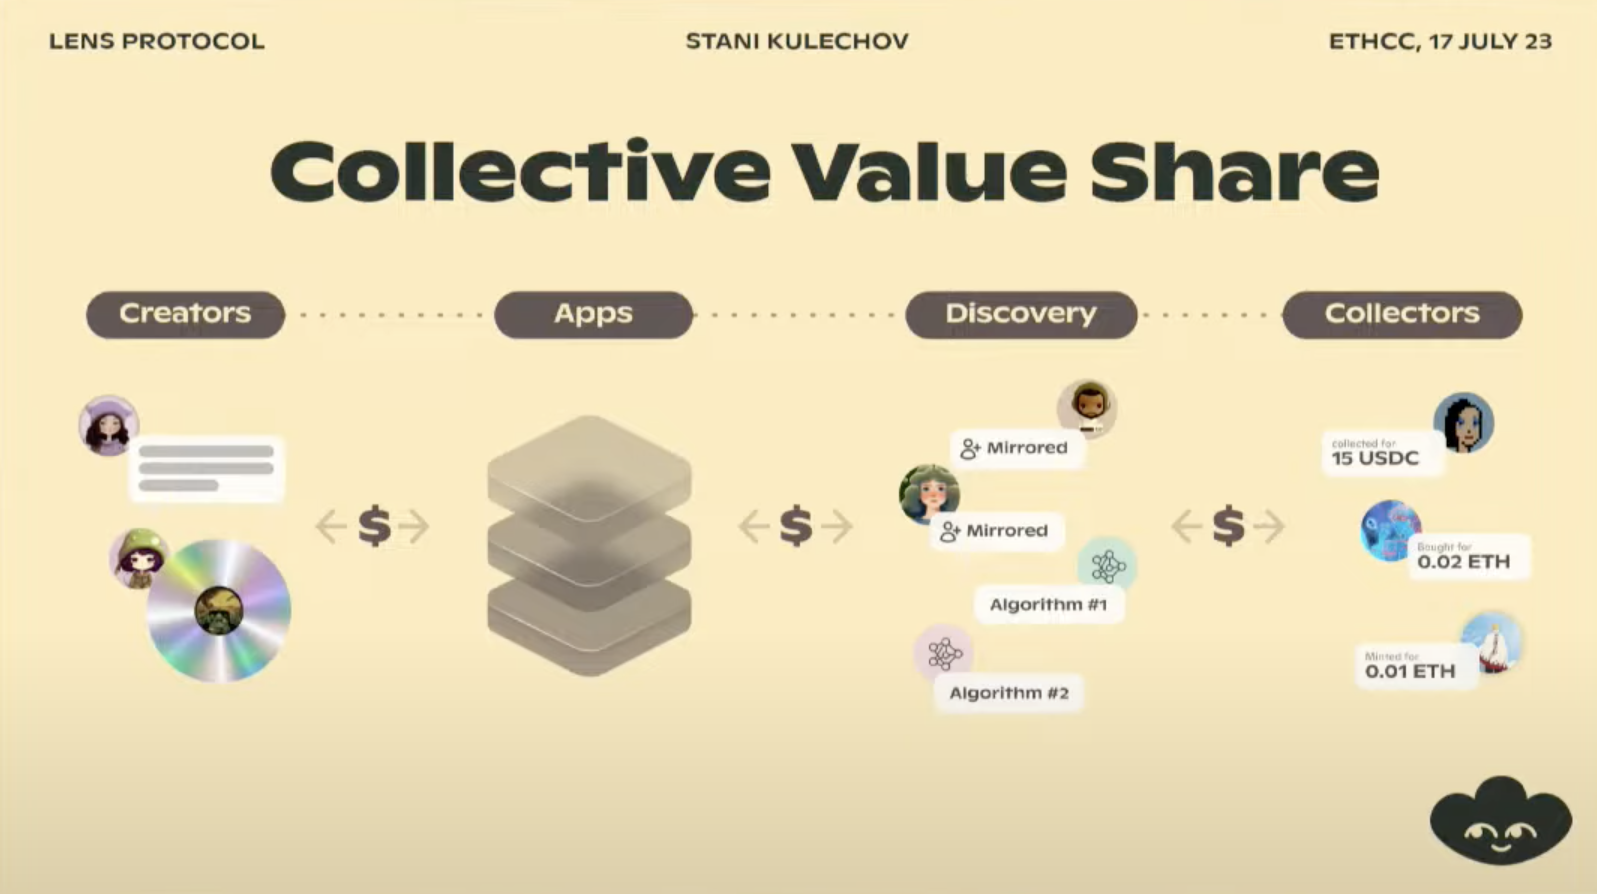 Visualizing how Collective Value Share might work